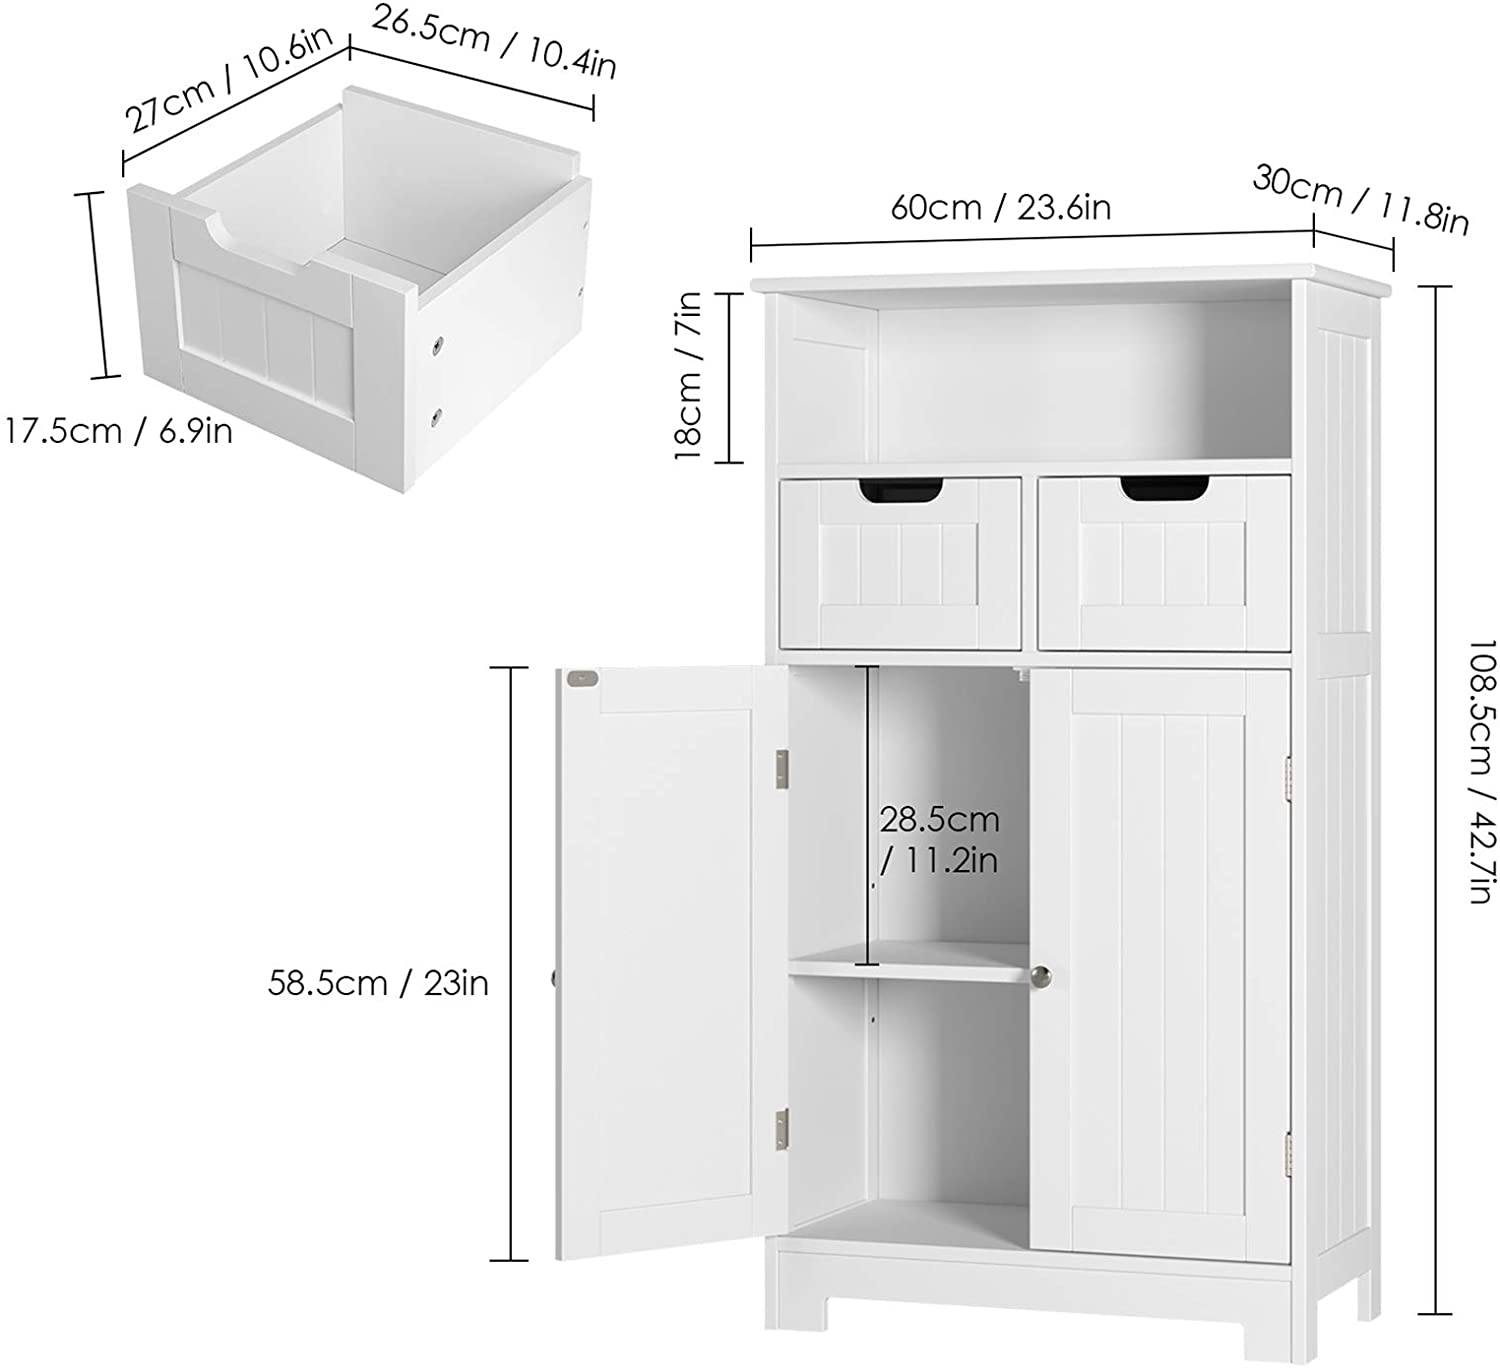 Homfa Bathroom Floor Storage Cabinet, Wood Linen Cabinet with Doors and Drawers and Adjustable Shelf, Kitchen Cupboard, Free Standing Organizer for Living Room Entryway Home Office, White - image 3 of 12